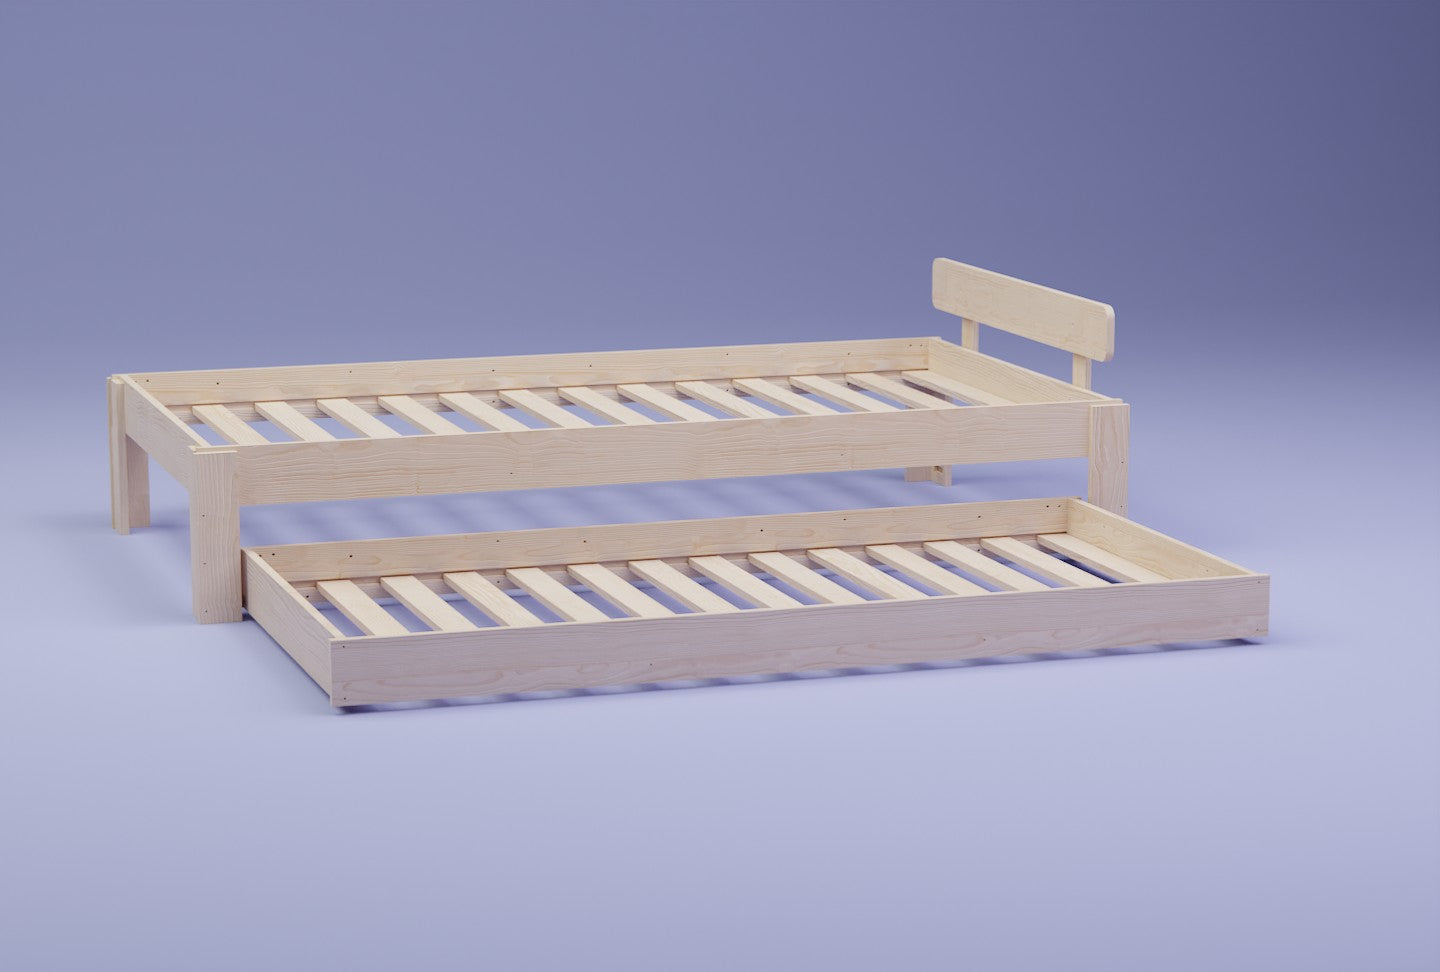 Enhance your home with our stylish and functional bed frame with trundle. Crafted from solid NZ Pine, it's affordable, durable, and perfect for kids.